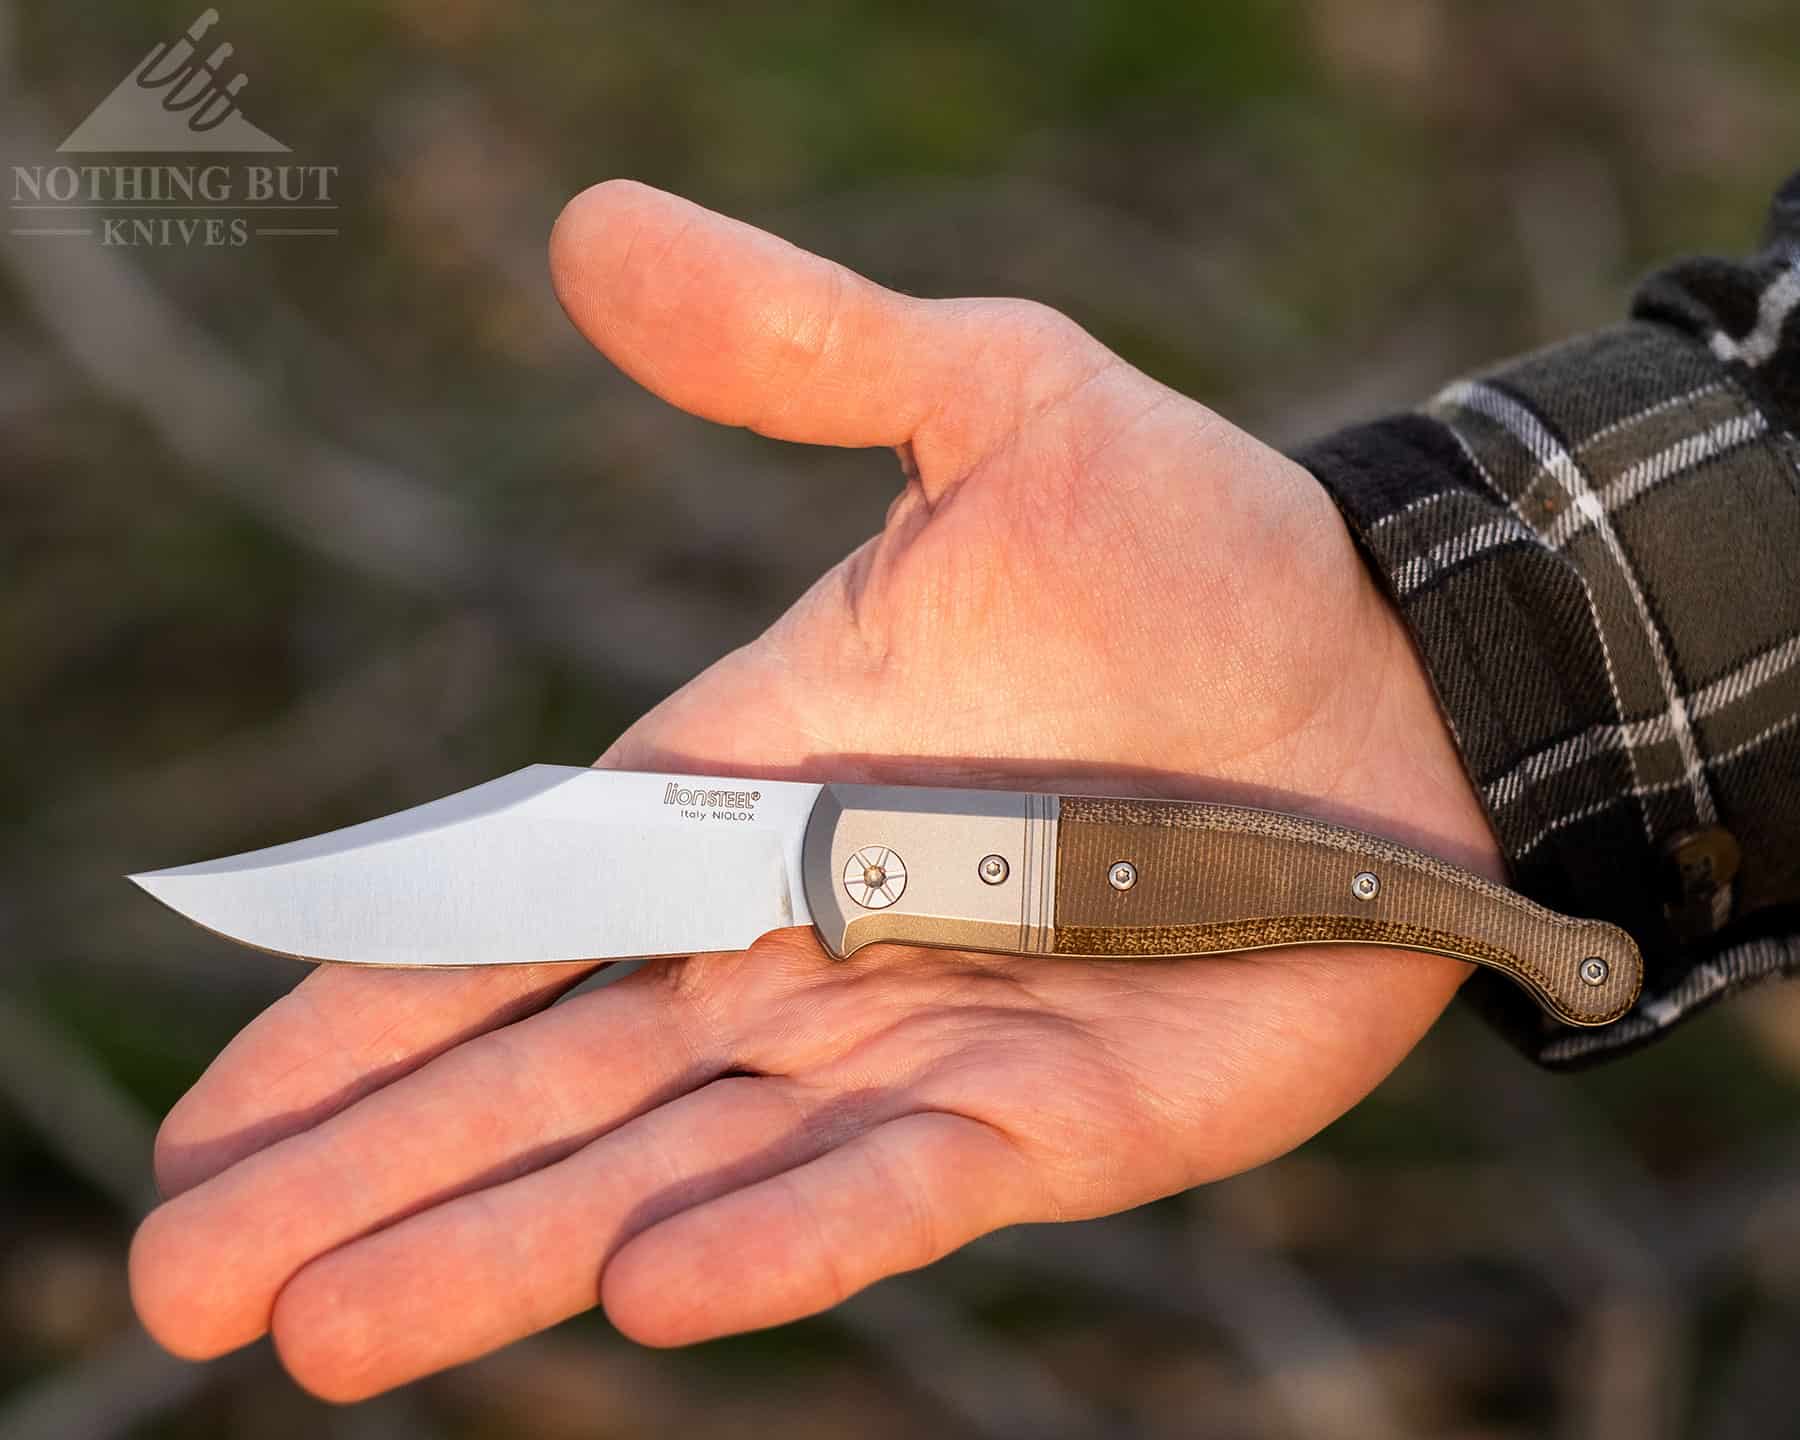 The LionSteel Gitano is a large slip joint which can be seen in this image of it in a person's hand. 